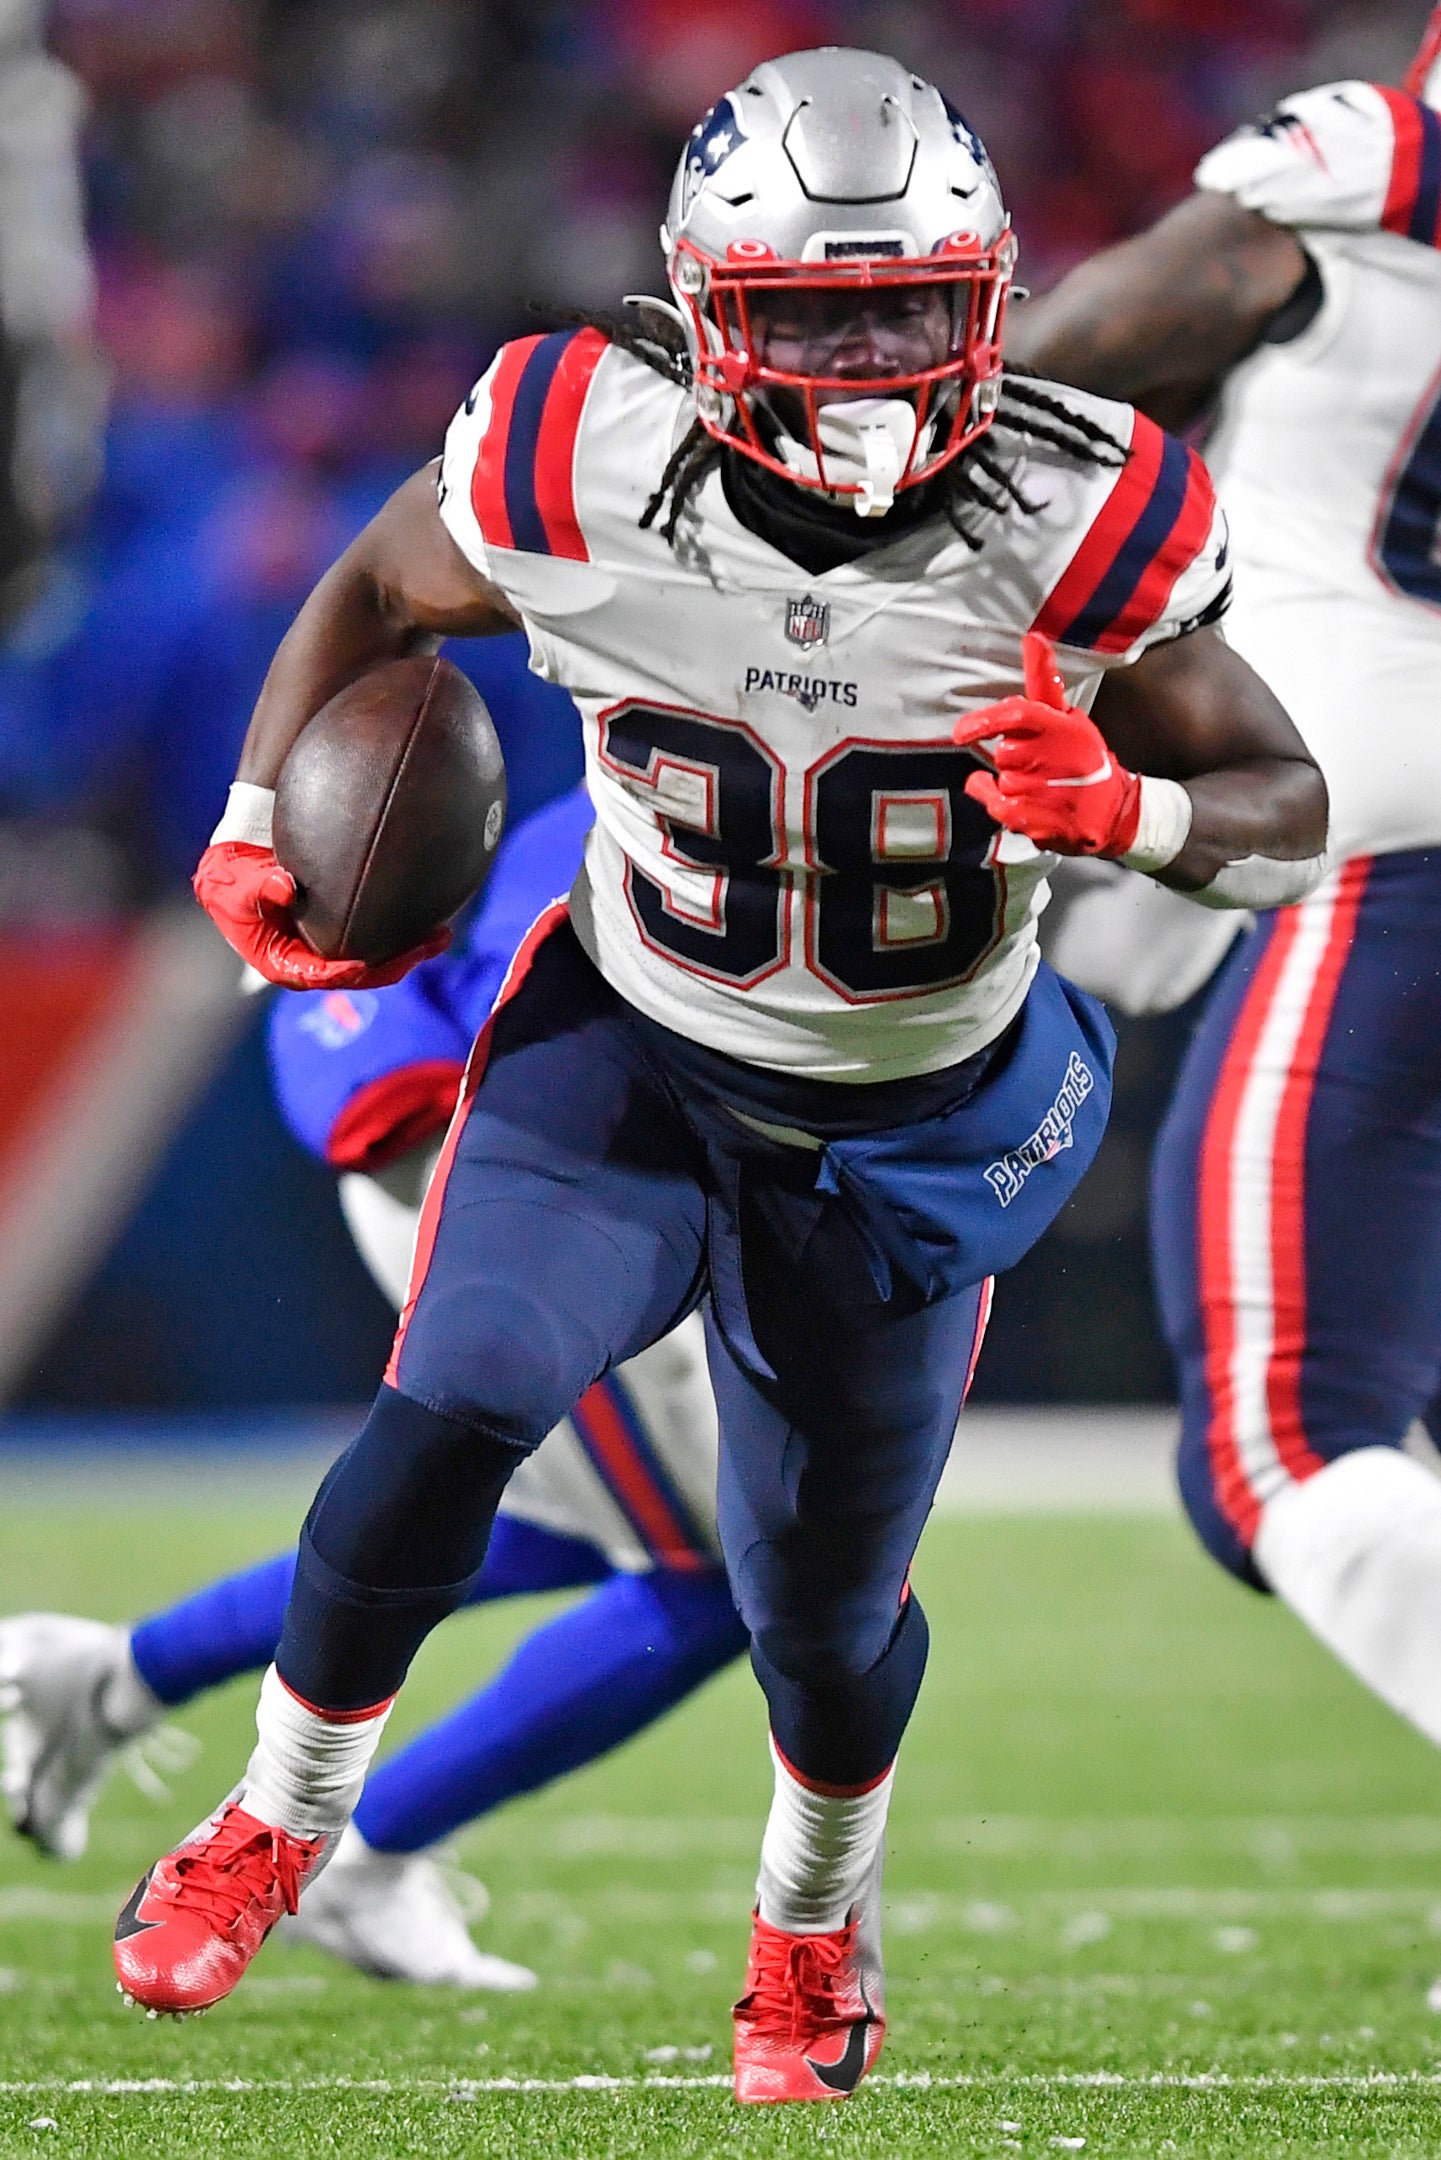 New England Patriots running back Rhamondre Stevenson (38) carries the football during the second half of an NFL football game against the Buffalo Bills in Orchard Park, New York (AP Photo/Adrian Kraus)